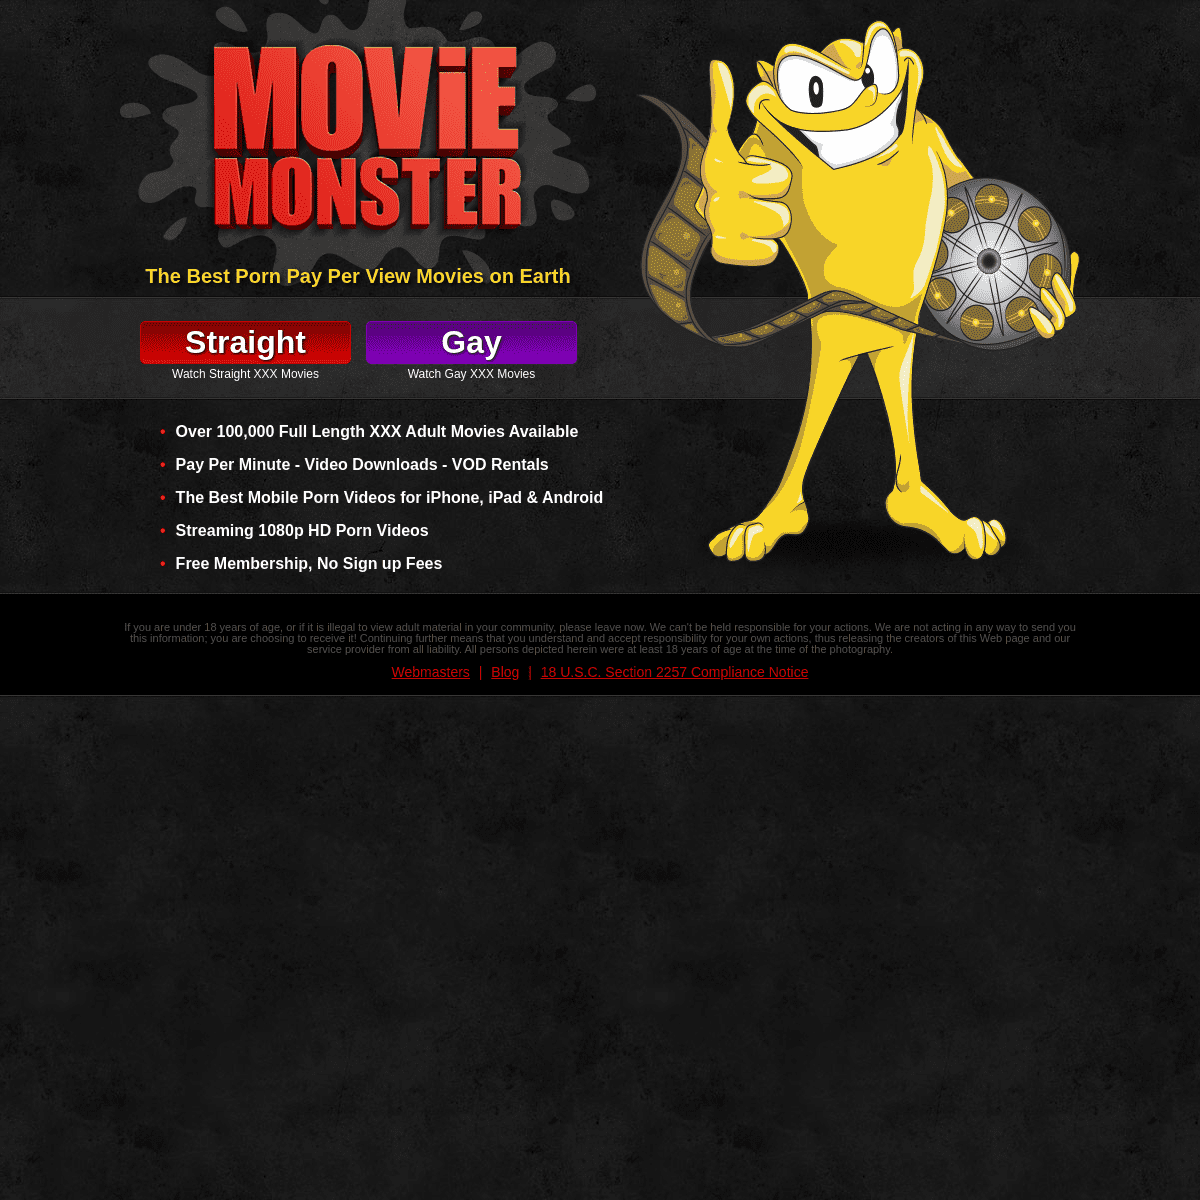 Movie Monster Adult VOD - AEBN Porn Pay Per View Network and Video On Demand. Over 100,000 XXX Straight and Gay Adult VOD movies